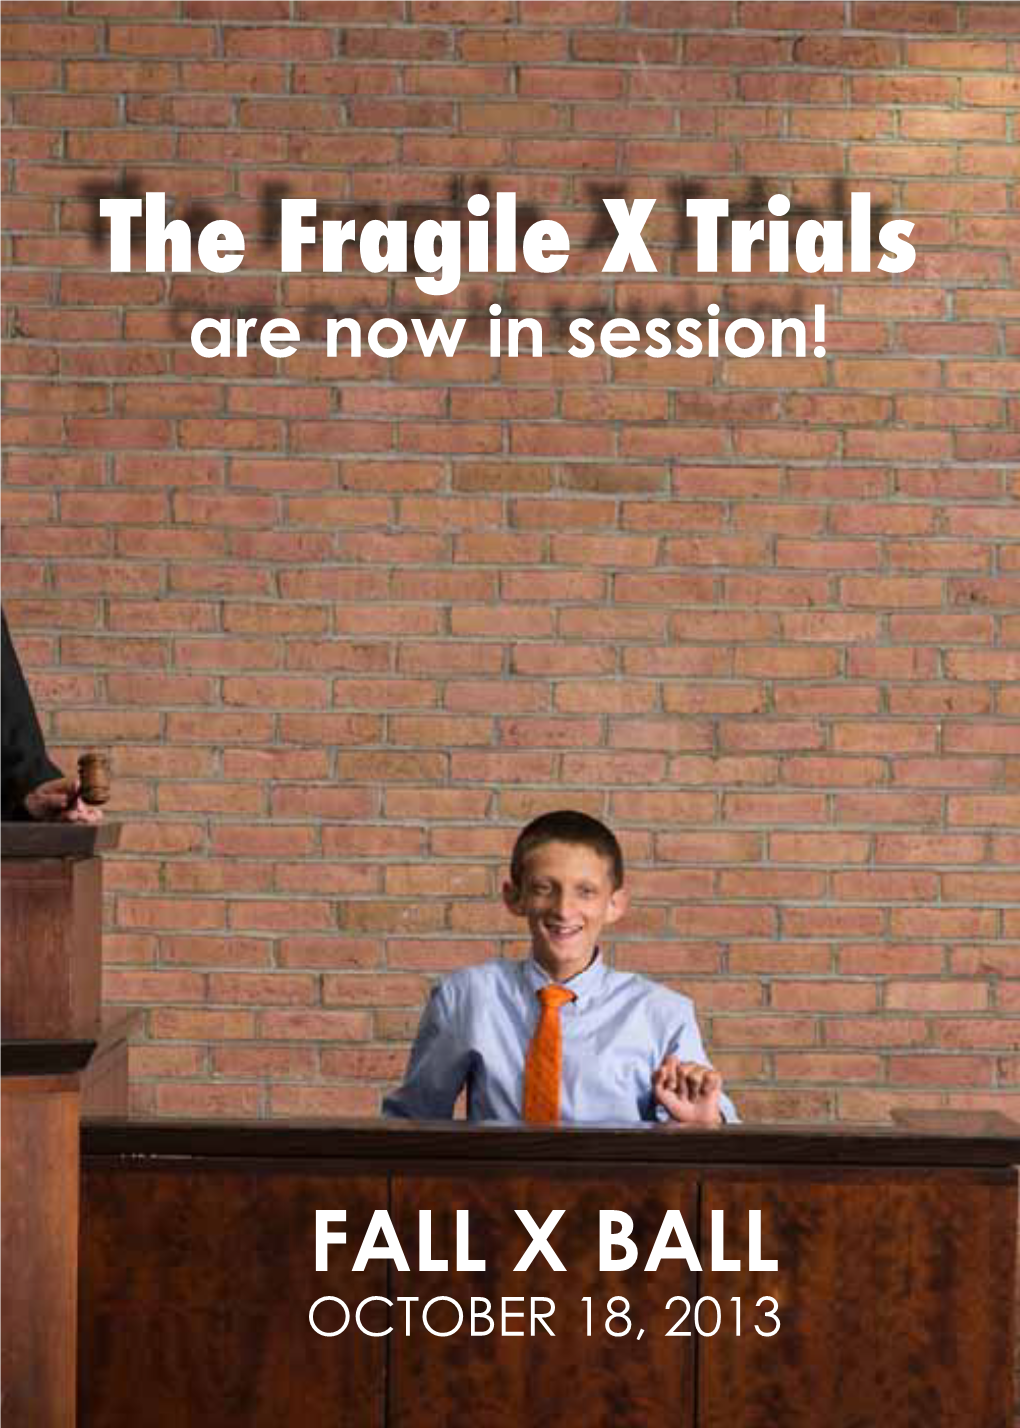 The Fragile X Trials Are Now in Session!